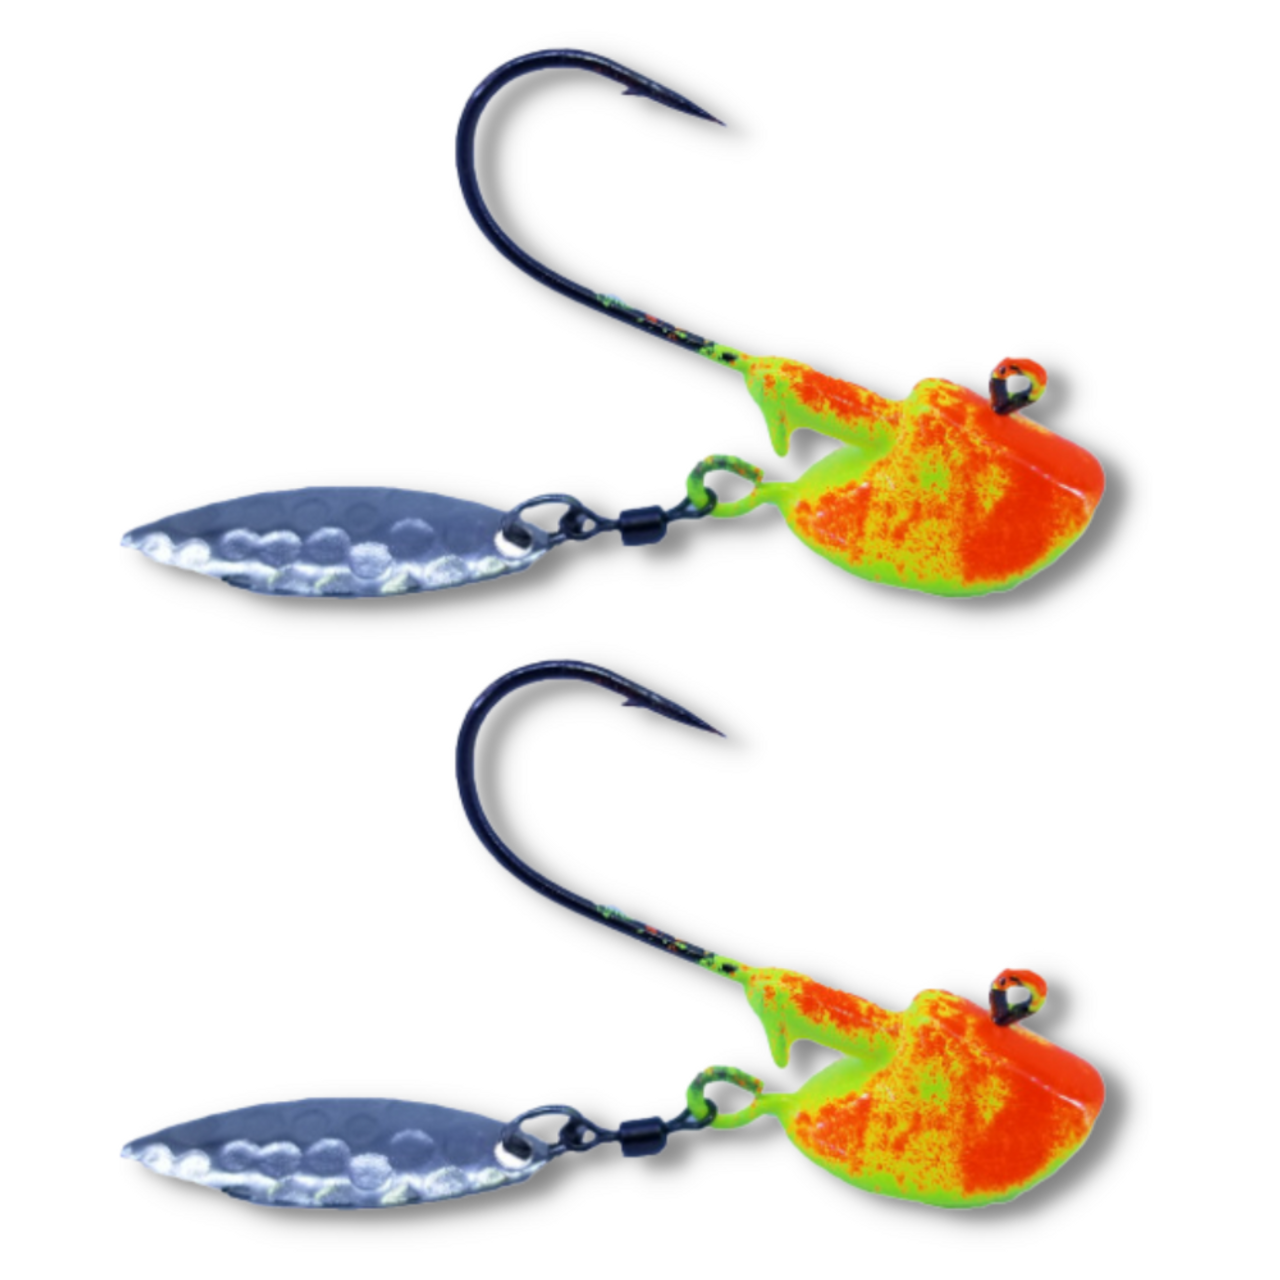 The CYCLONE jig will drive fish crazy, the FLASH and the Sparkle with only make the fish go crazier for your bait. These are in 3/8 oz they work great for  PIKE,WALLEYE,GREENBxACKS,MUSKY,LAKE TROUT. These are poured on e super strong Eagle Claw hook in Black nickle for EVEN more FLASH. 